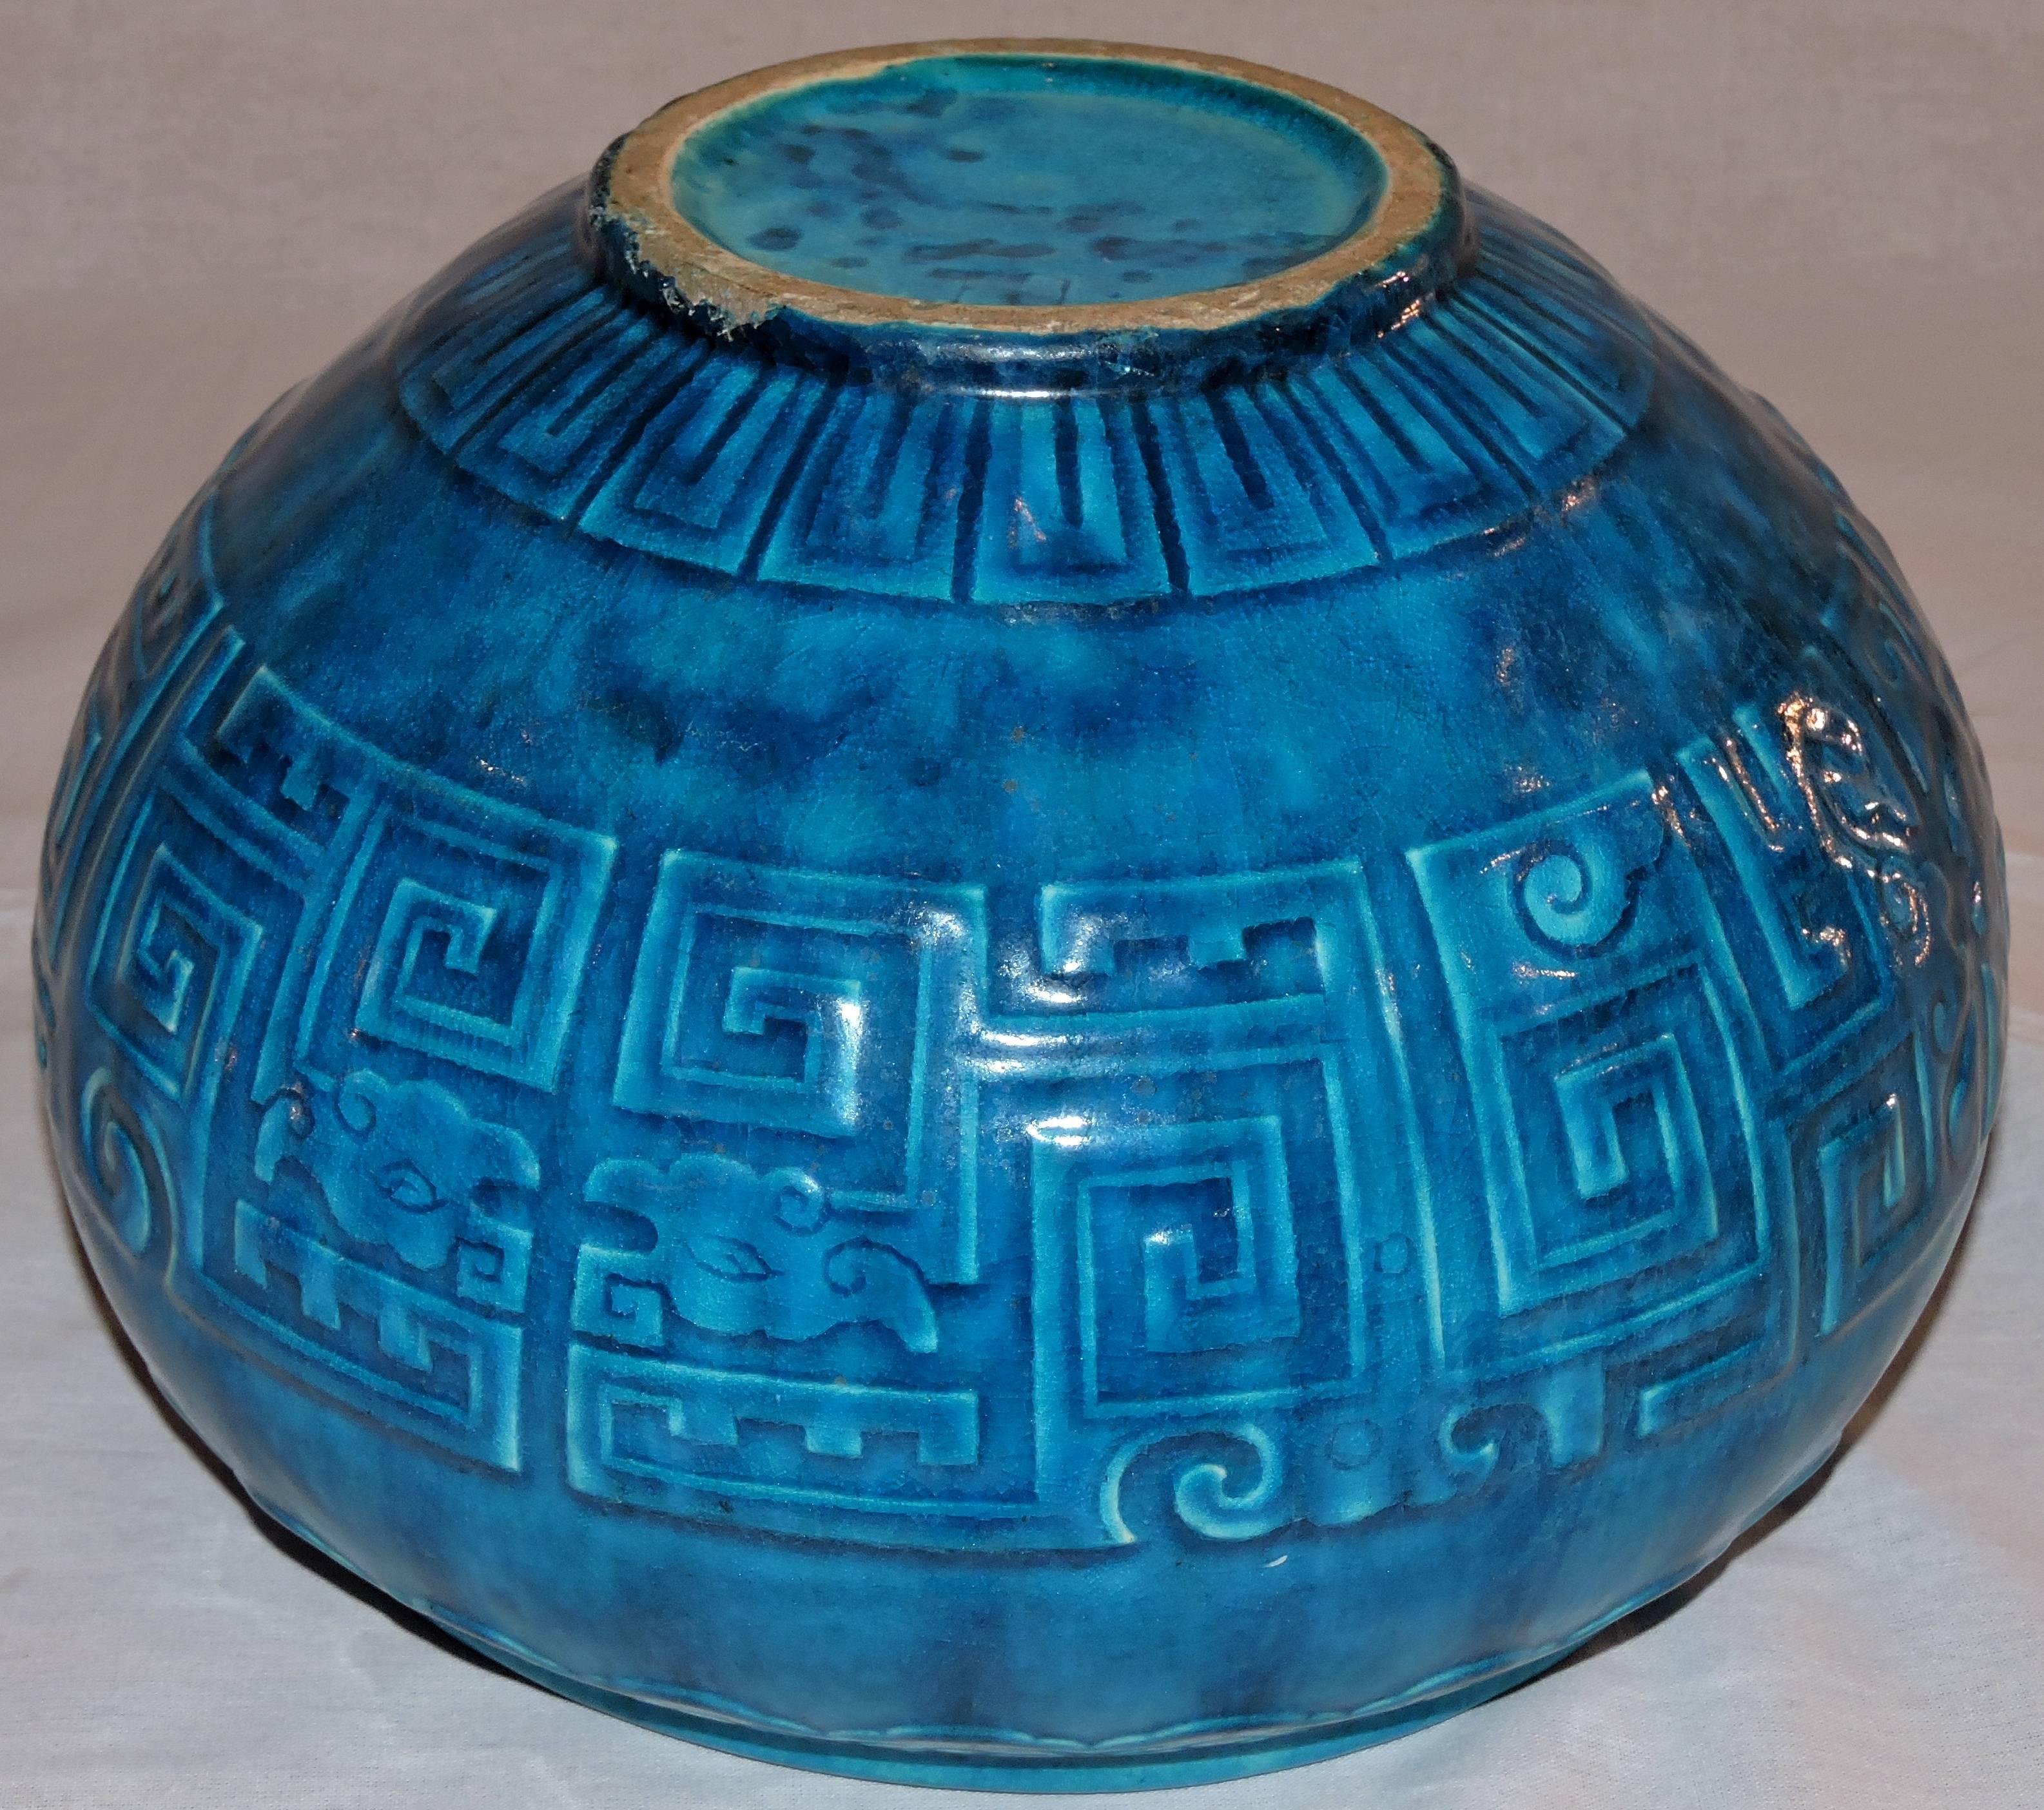 Enameled Théodore Deck Blue-Persian Faience Cachepot